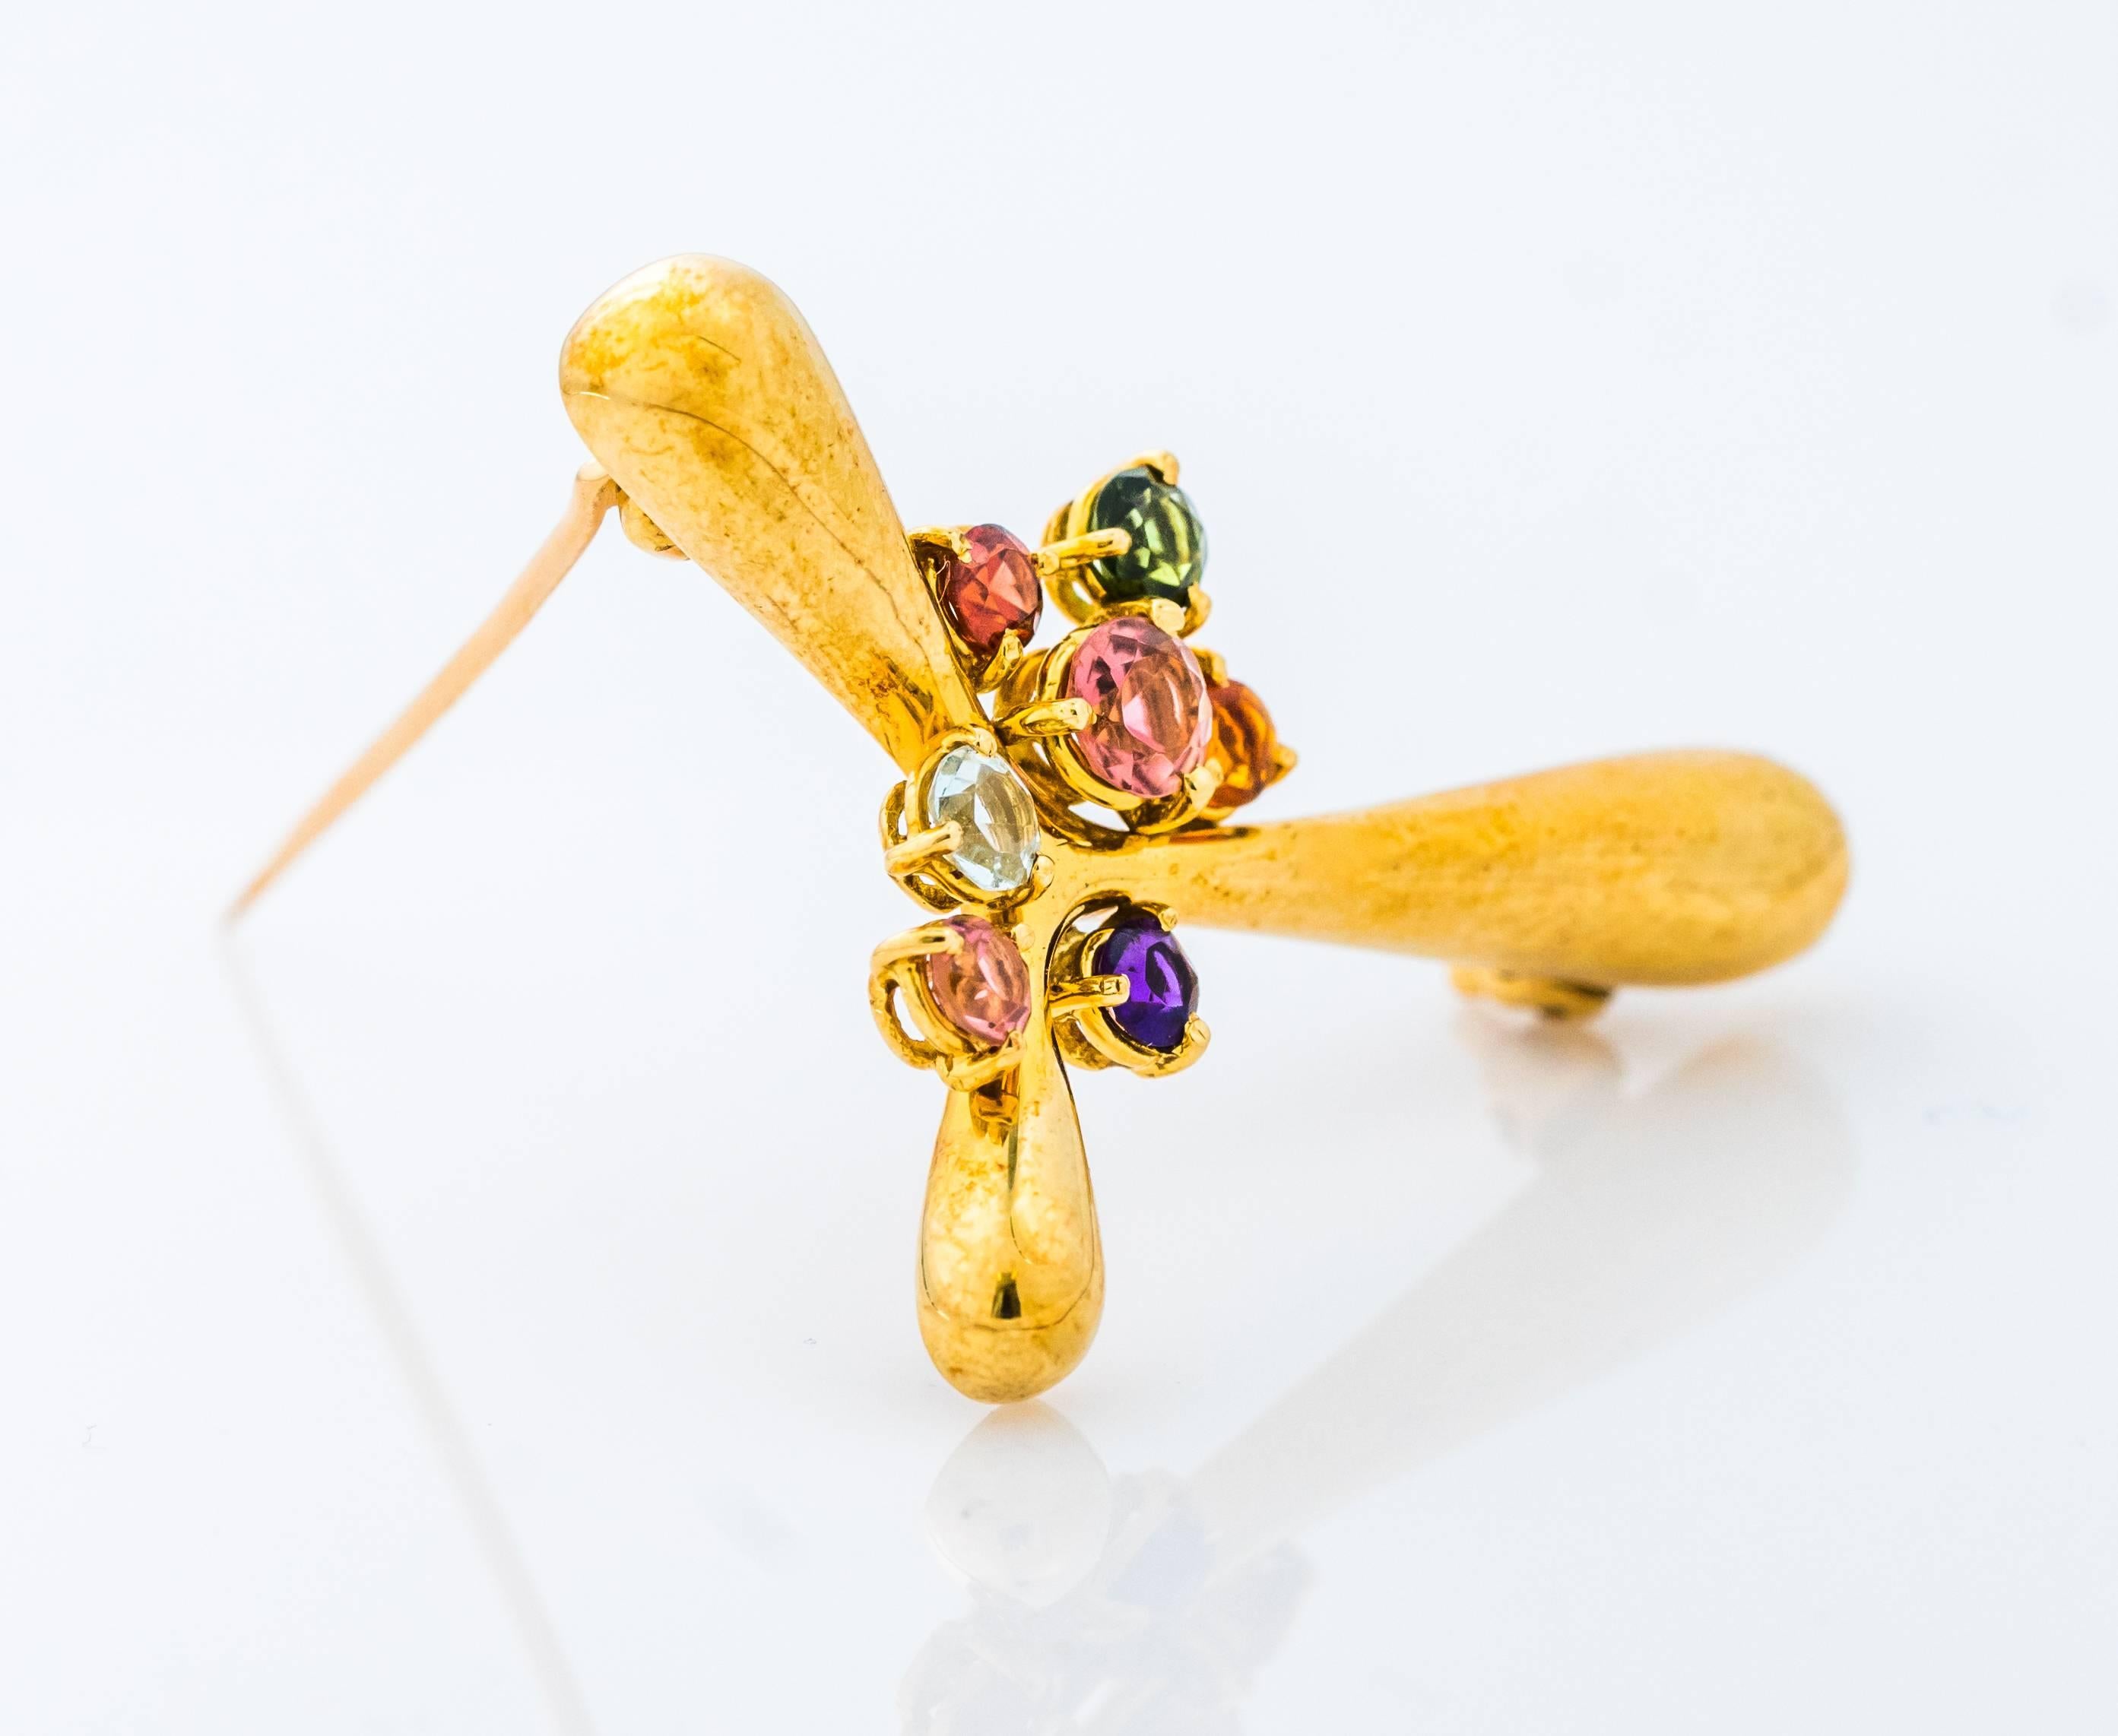 This lovely 1990s H. Stern 18 karat yellow gold brooch features 7 sparkling semiprecious gemstones including amethyst, tourmaline and aquamarine. This wonderfully abstract pin weighs 8 grams and measures 1.5 inches wide by 1.25 inches high. This